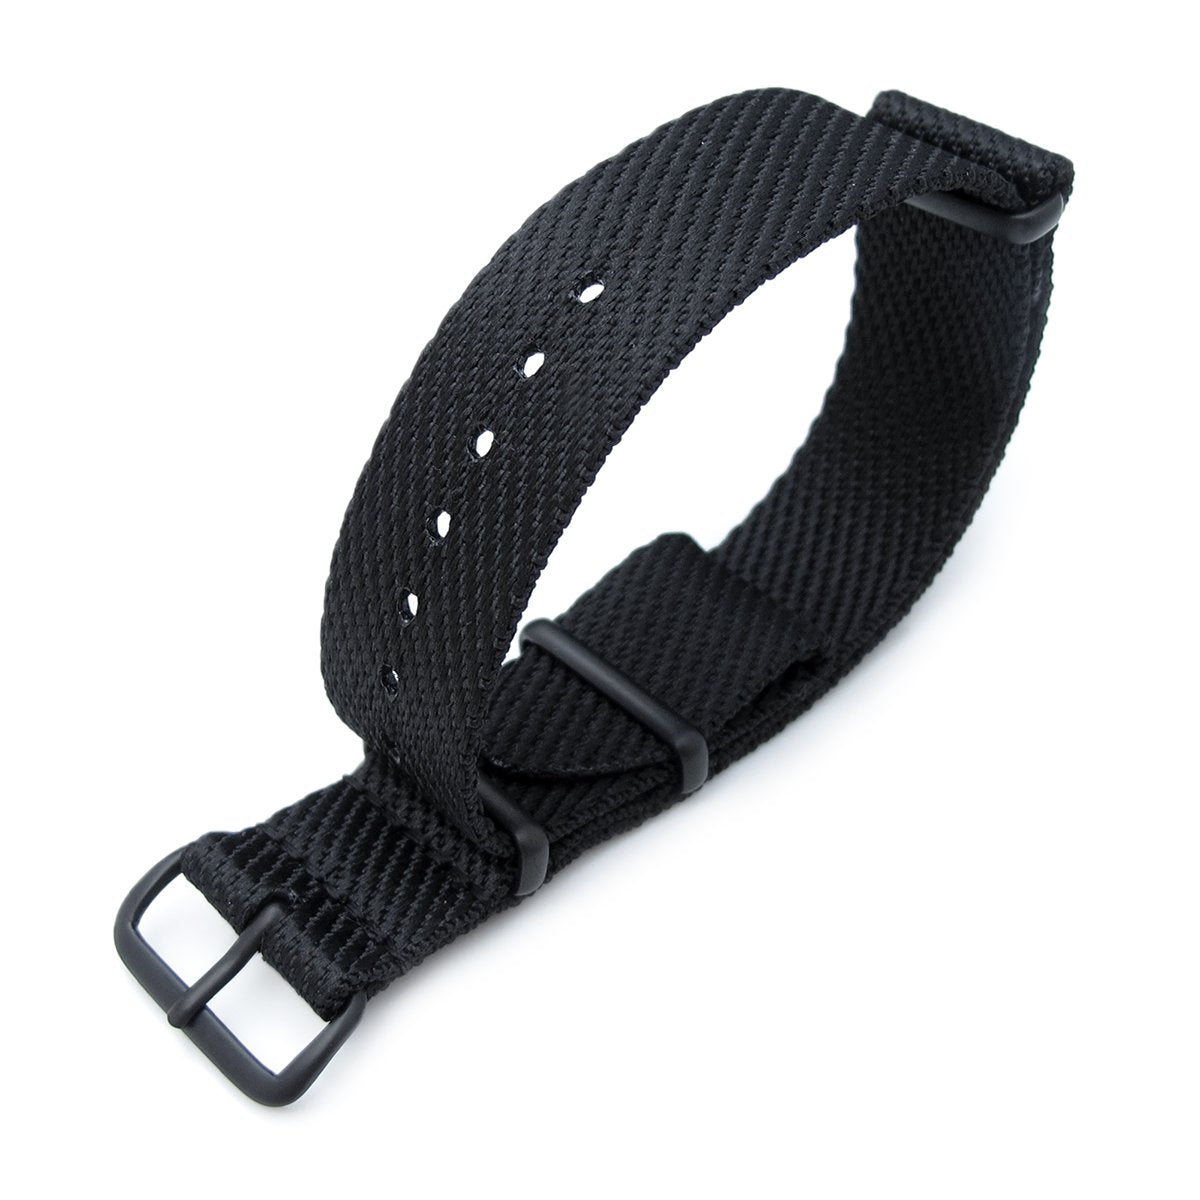 MiLTAT 20mm G10 Military NATO Watch Strap Waffle Nylon Armband PVD Matte Black Strapcode Watch Bands